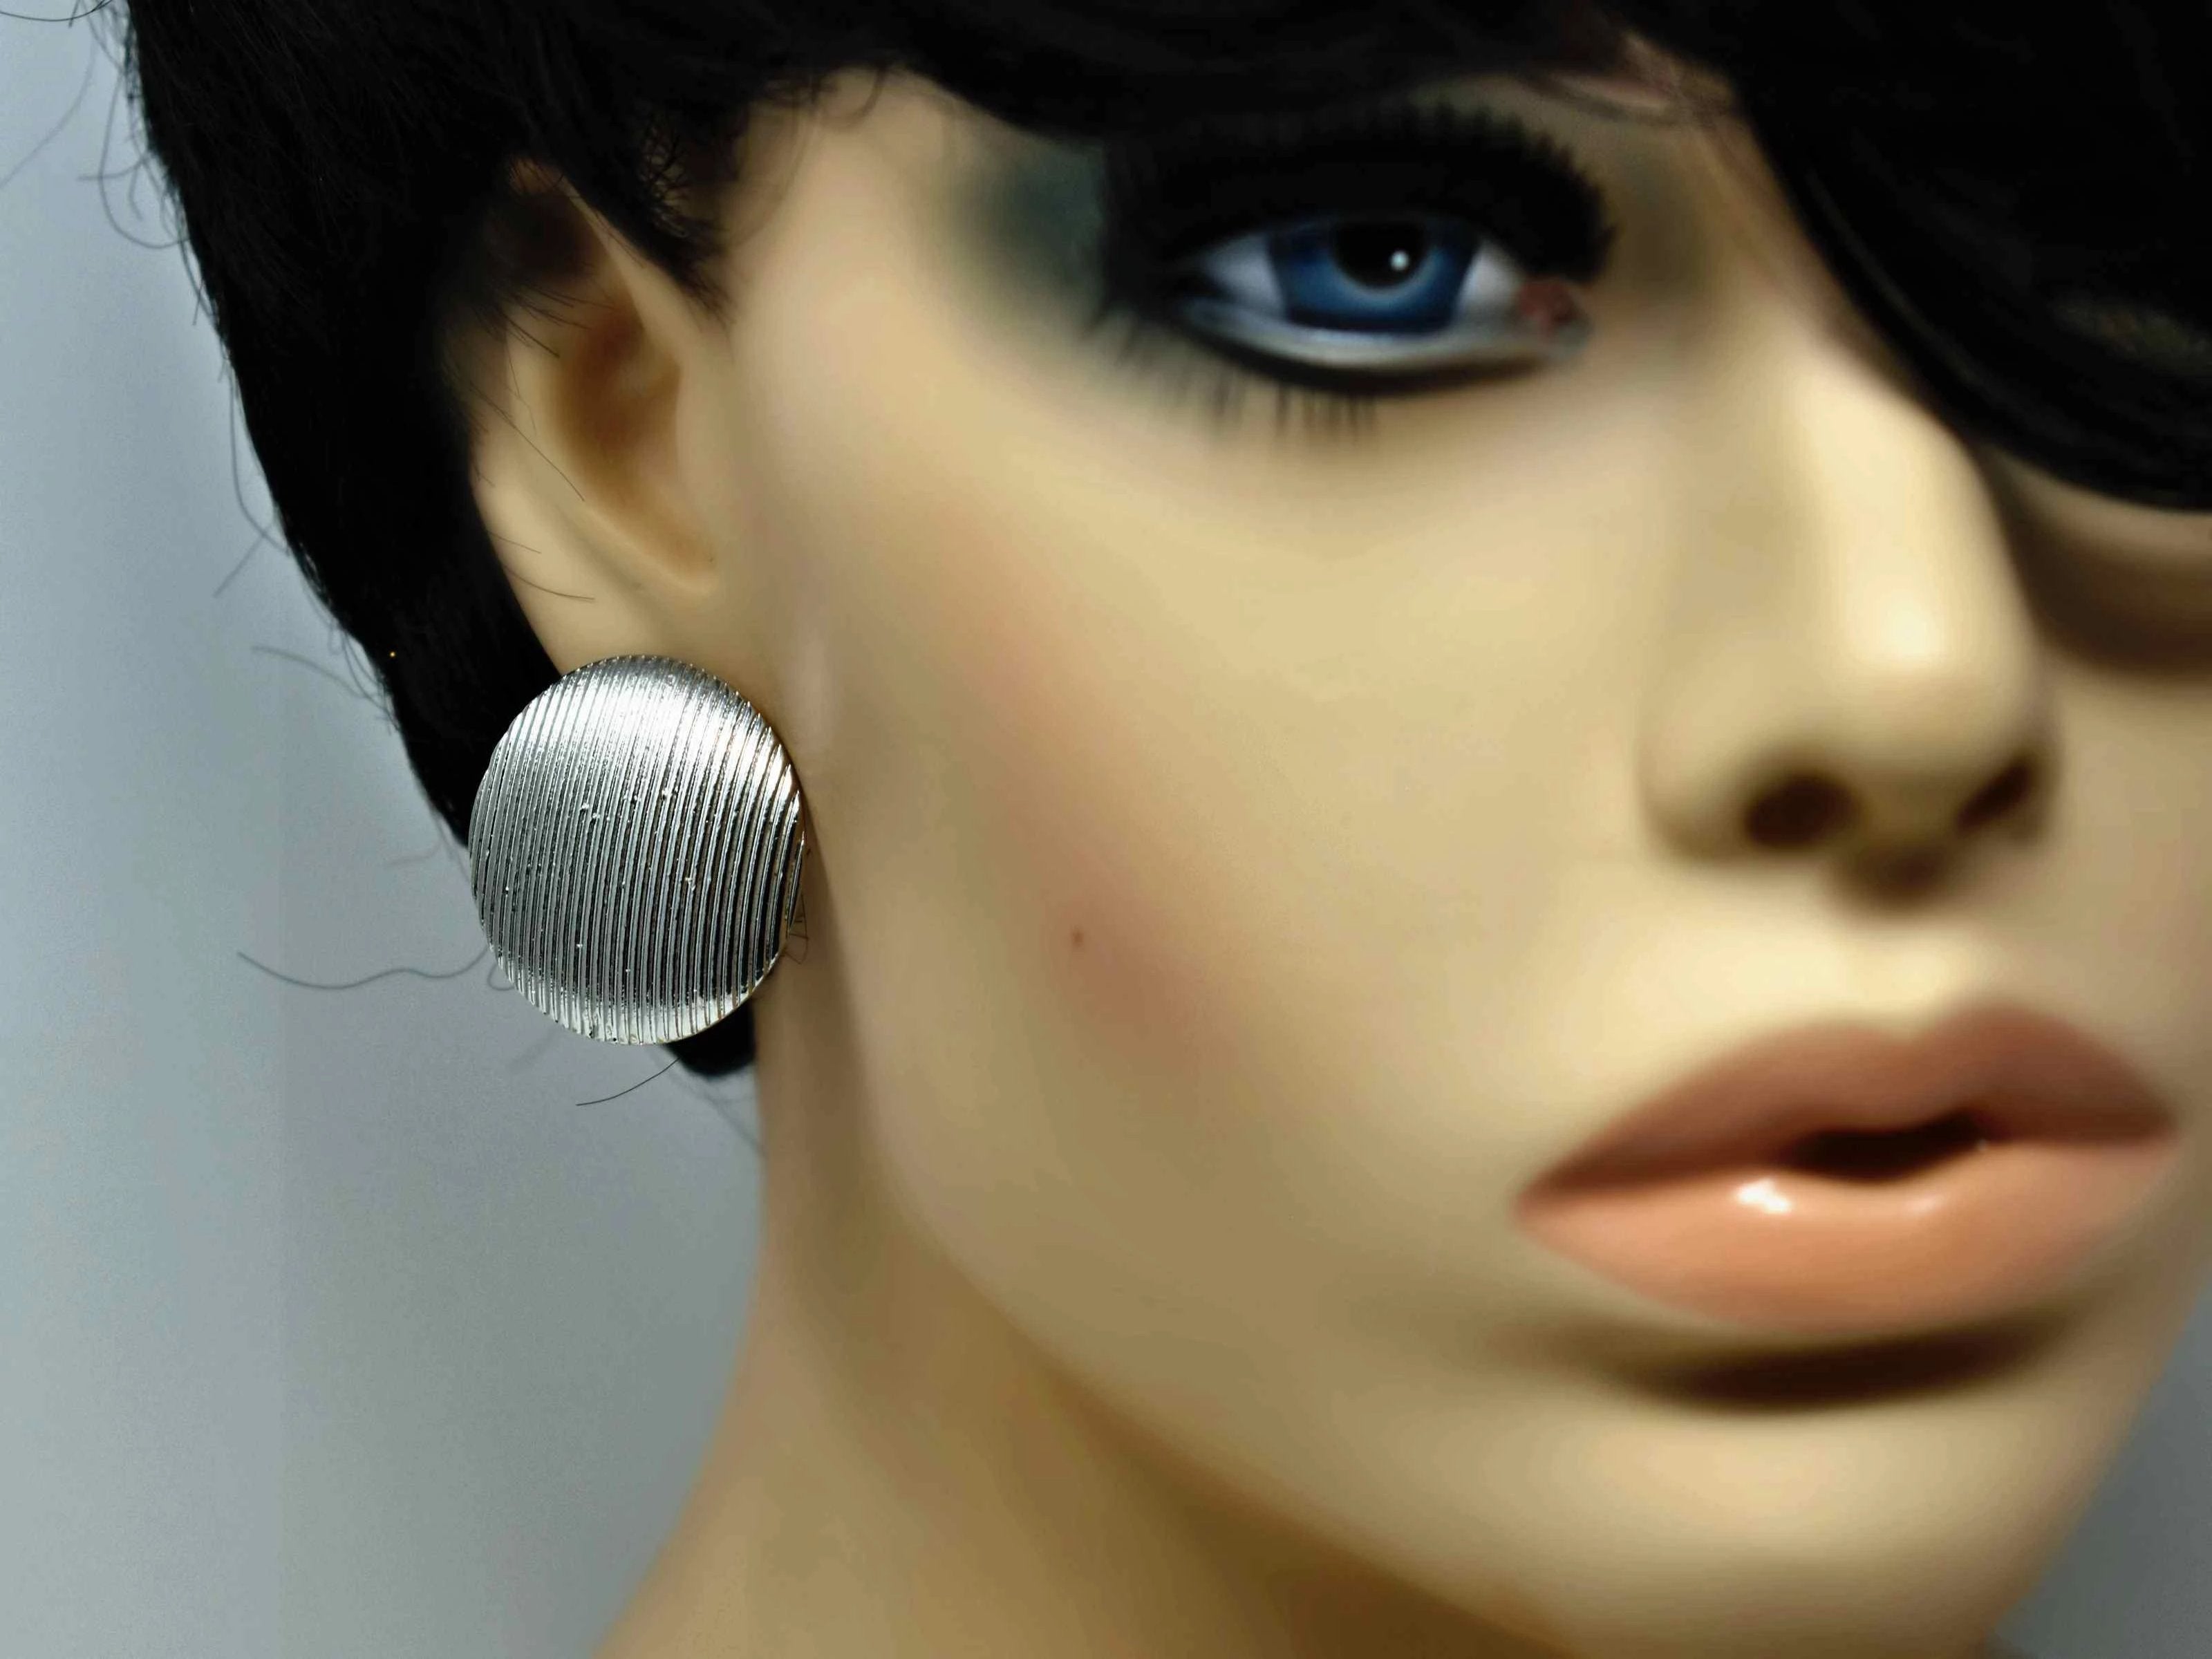 Our Dahli Silver earrings are good for any occasion. They are silver medium sized knob earrings with a pinstripe design and a pushback clasp.